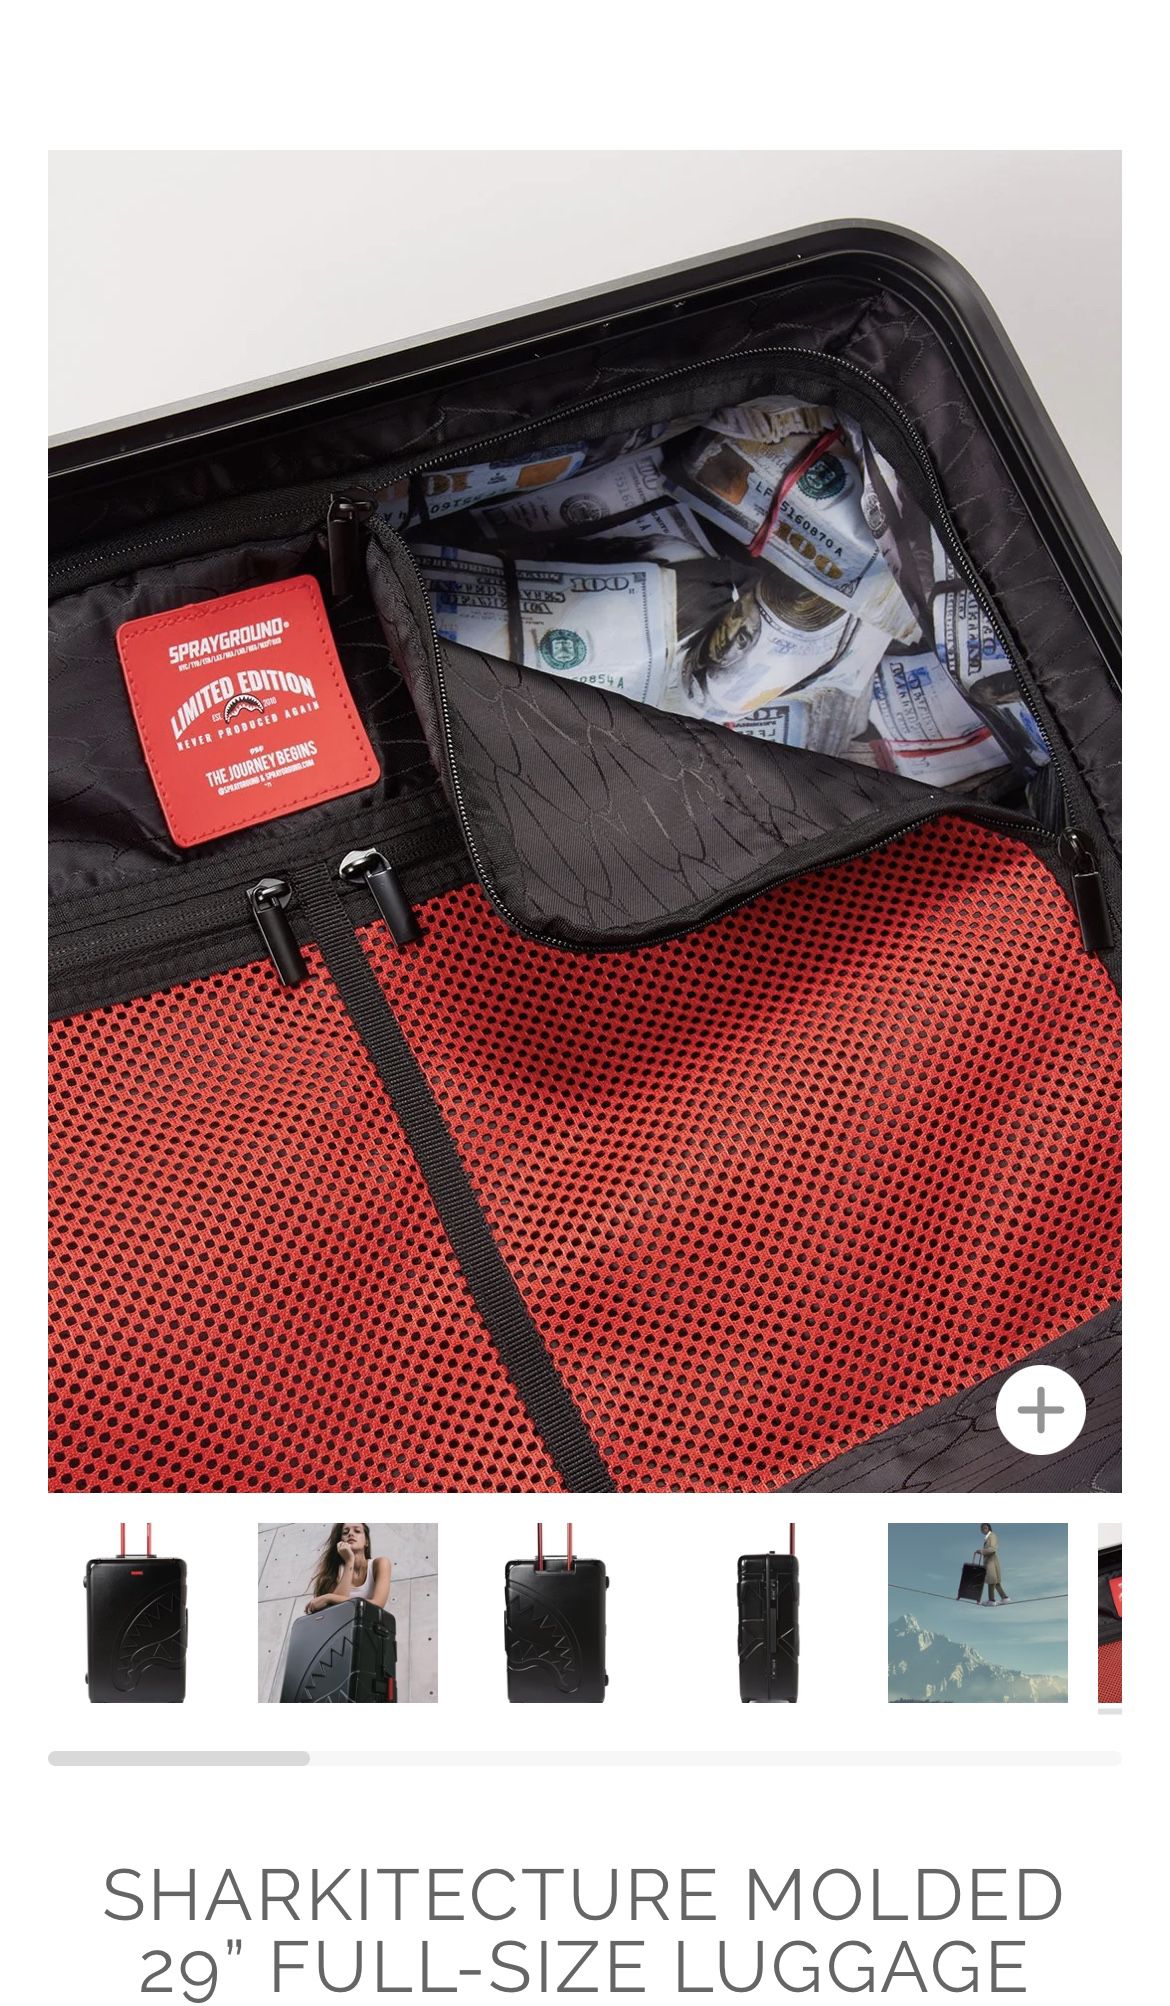 SHARKITECTURE MOLDED 29” FULL-SIZE LUGGAGE for Sale in Palm Beach Gardens,  FL - OfferUp